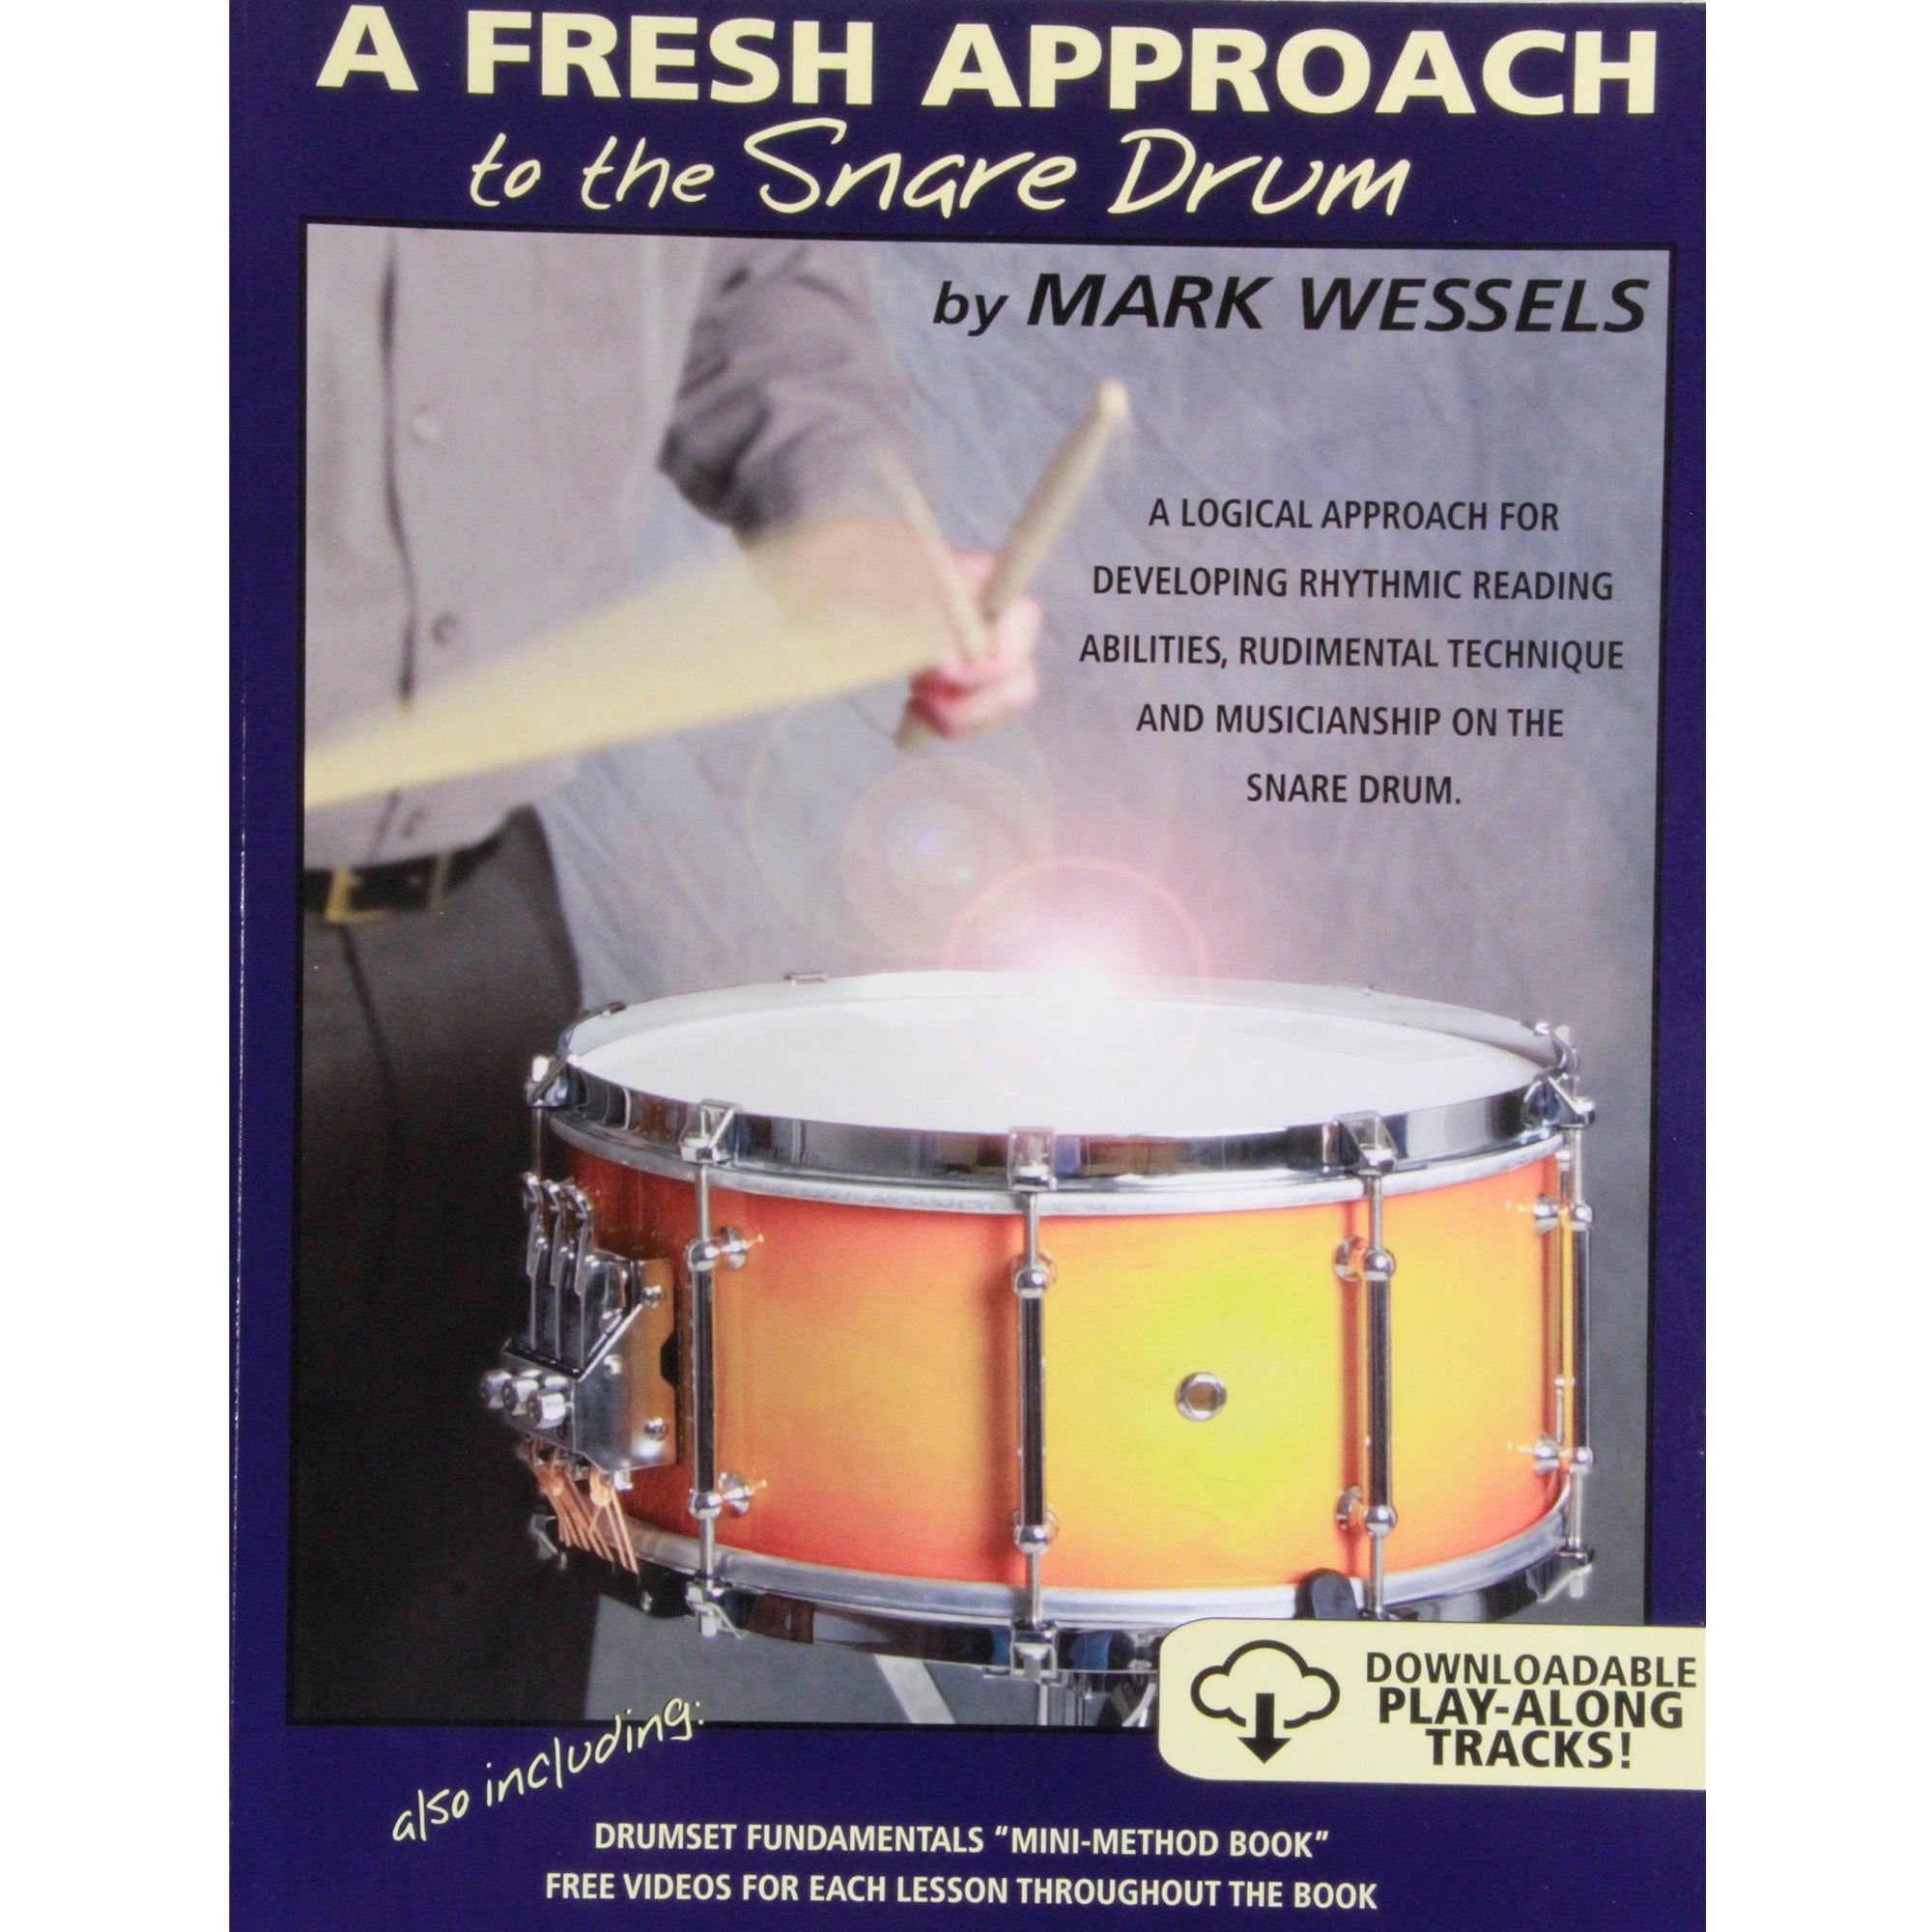 WESSELS PUBLIS AFATSD Fresh Approach to Snare Drum